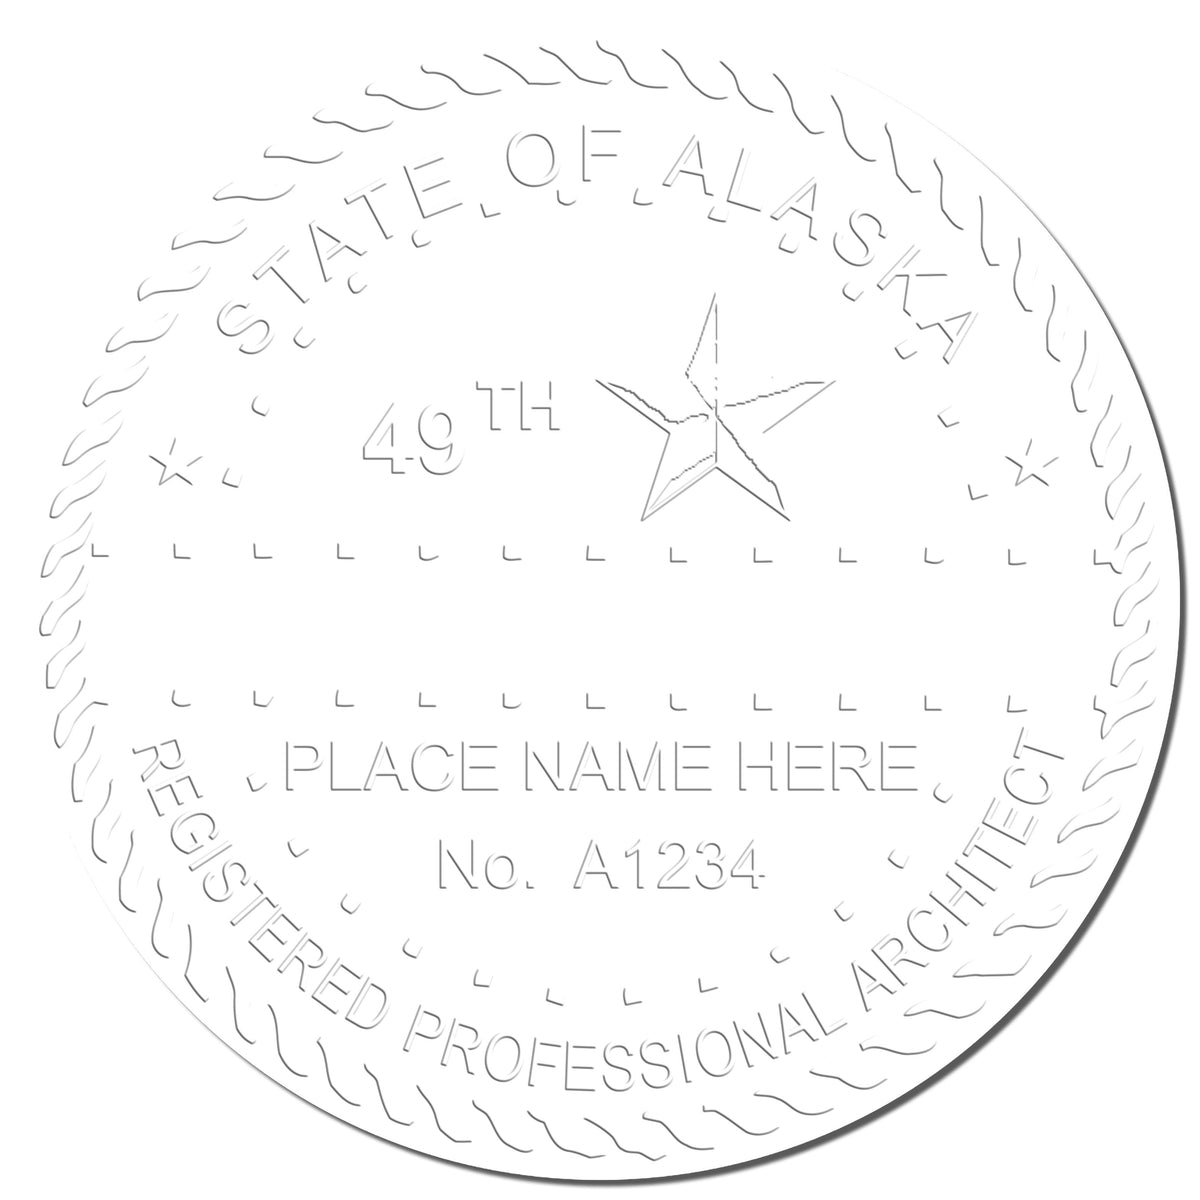 A photograph of the Handheld Alaska Architect Seal Embosser stamp impression reveals a vivid, professional image of the on paper.